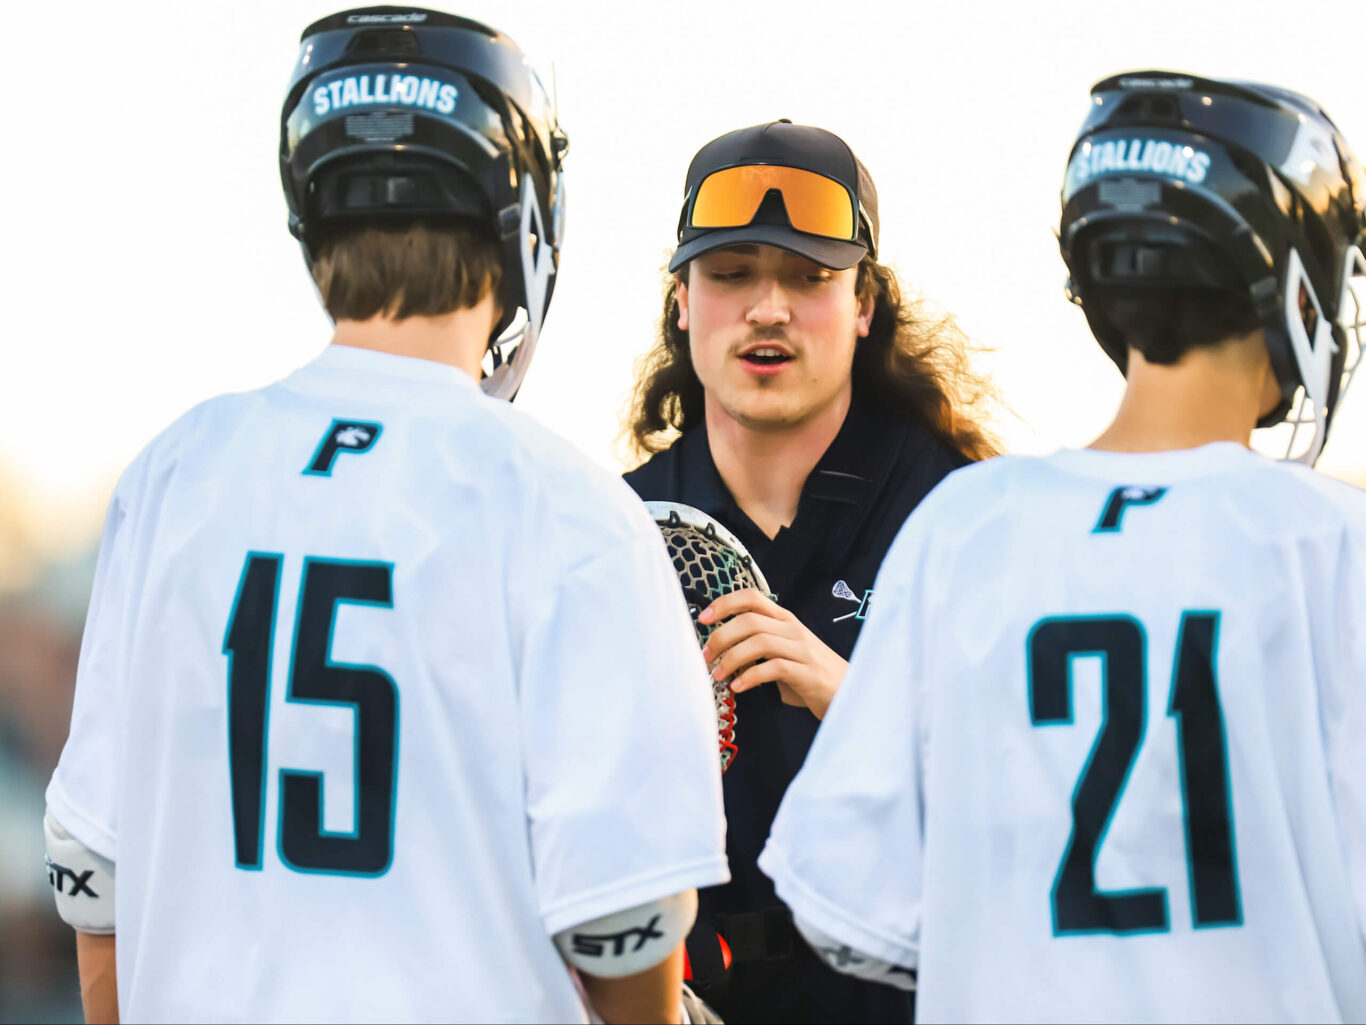 A group of lacrosse players, predominantly boys, conversing with each other.